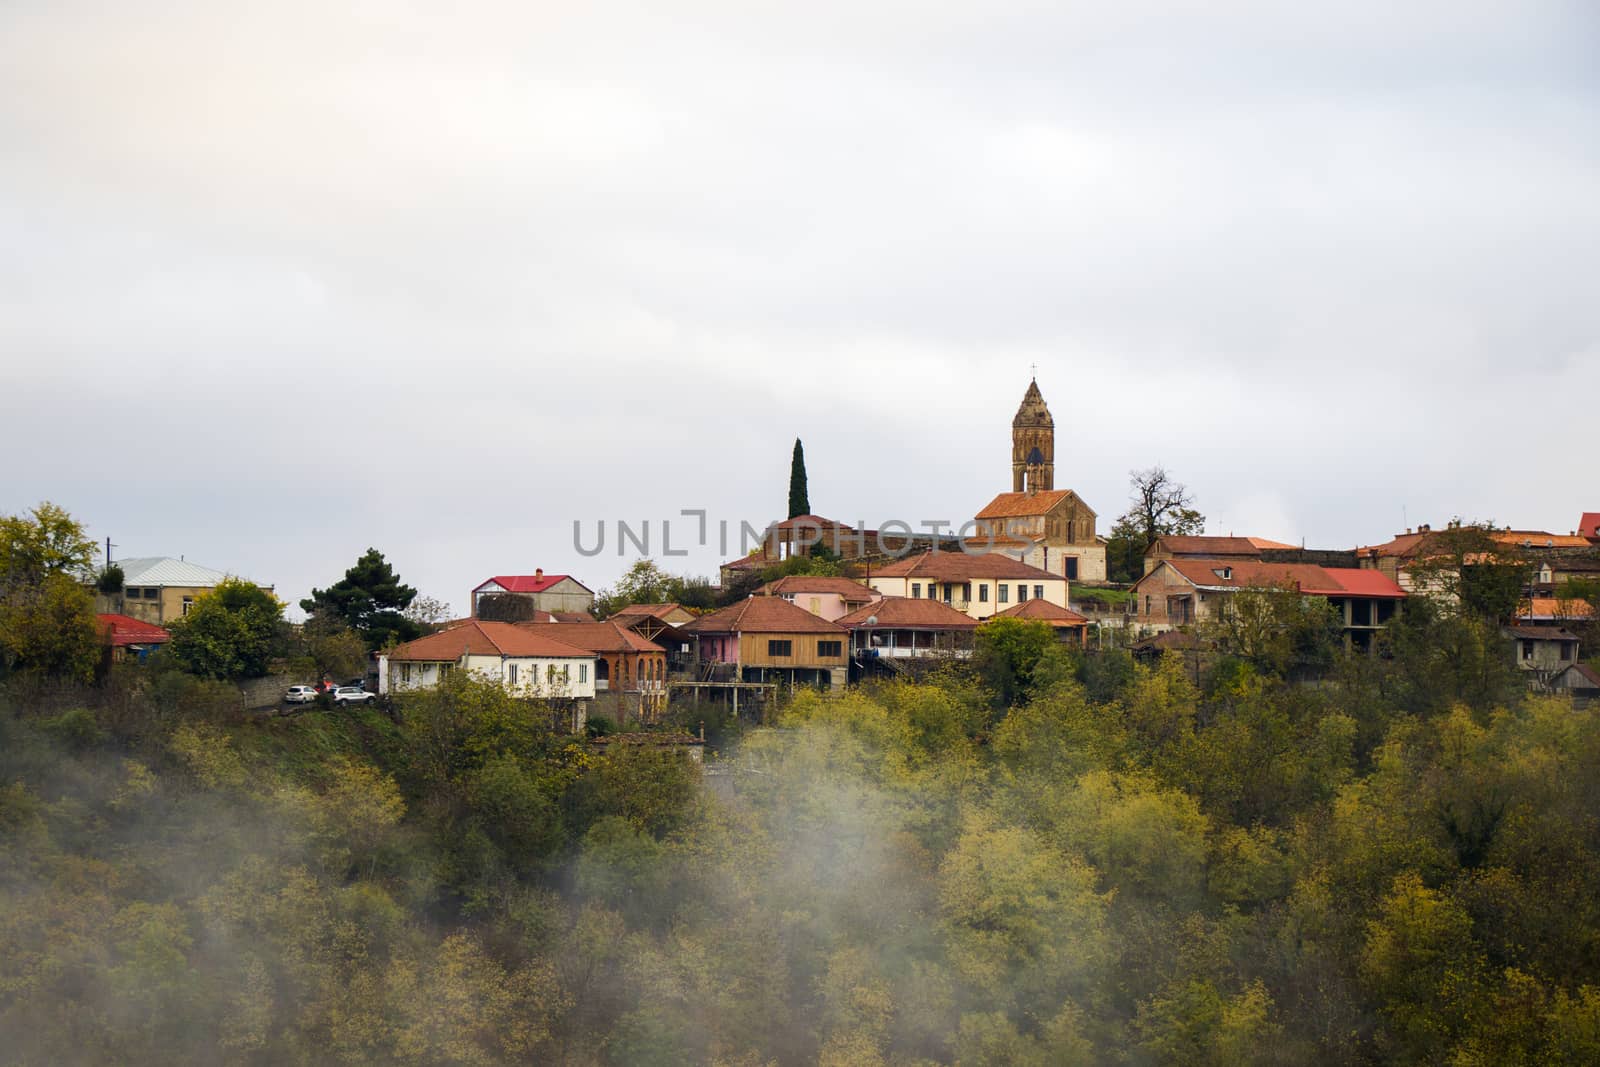 Sighnaghi village landscape and city view in Kakheti, Georgia by Taidundua